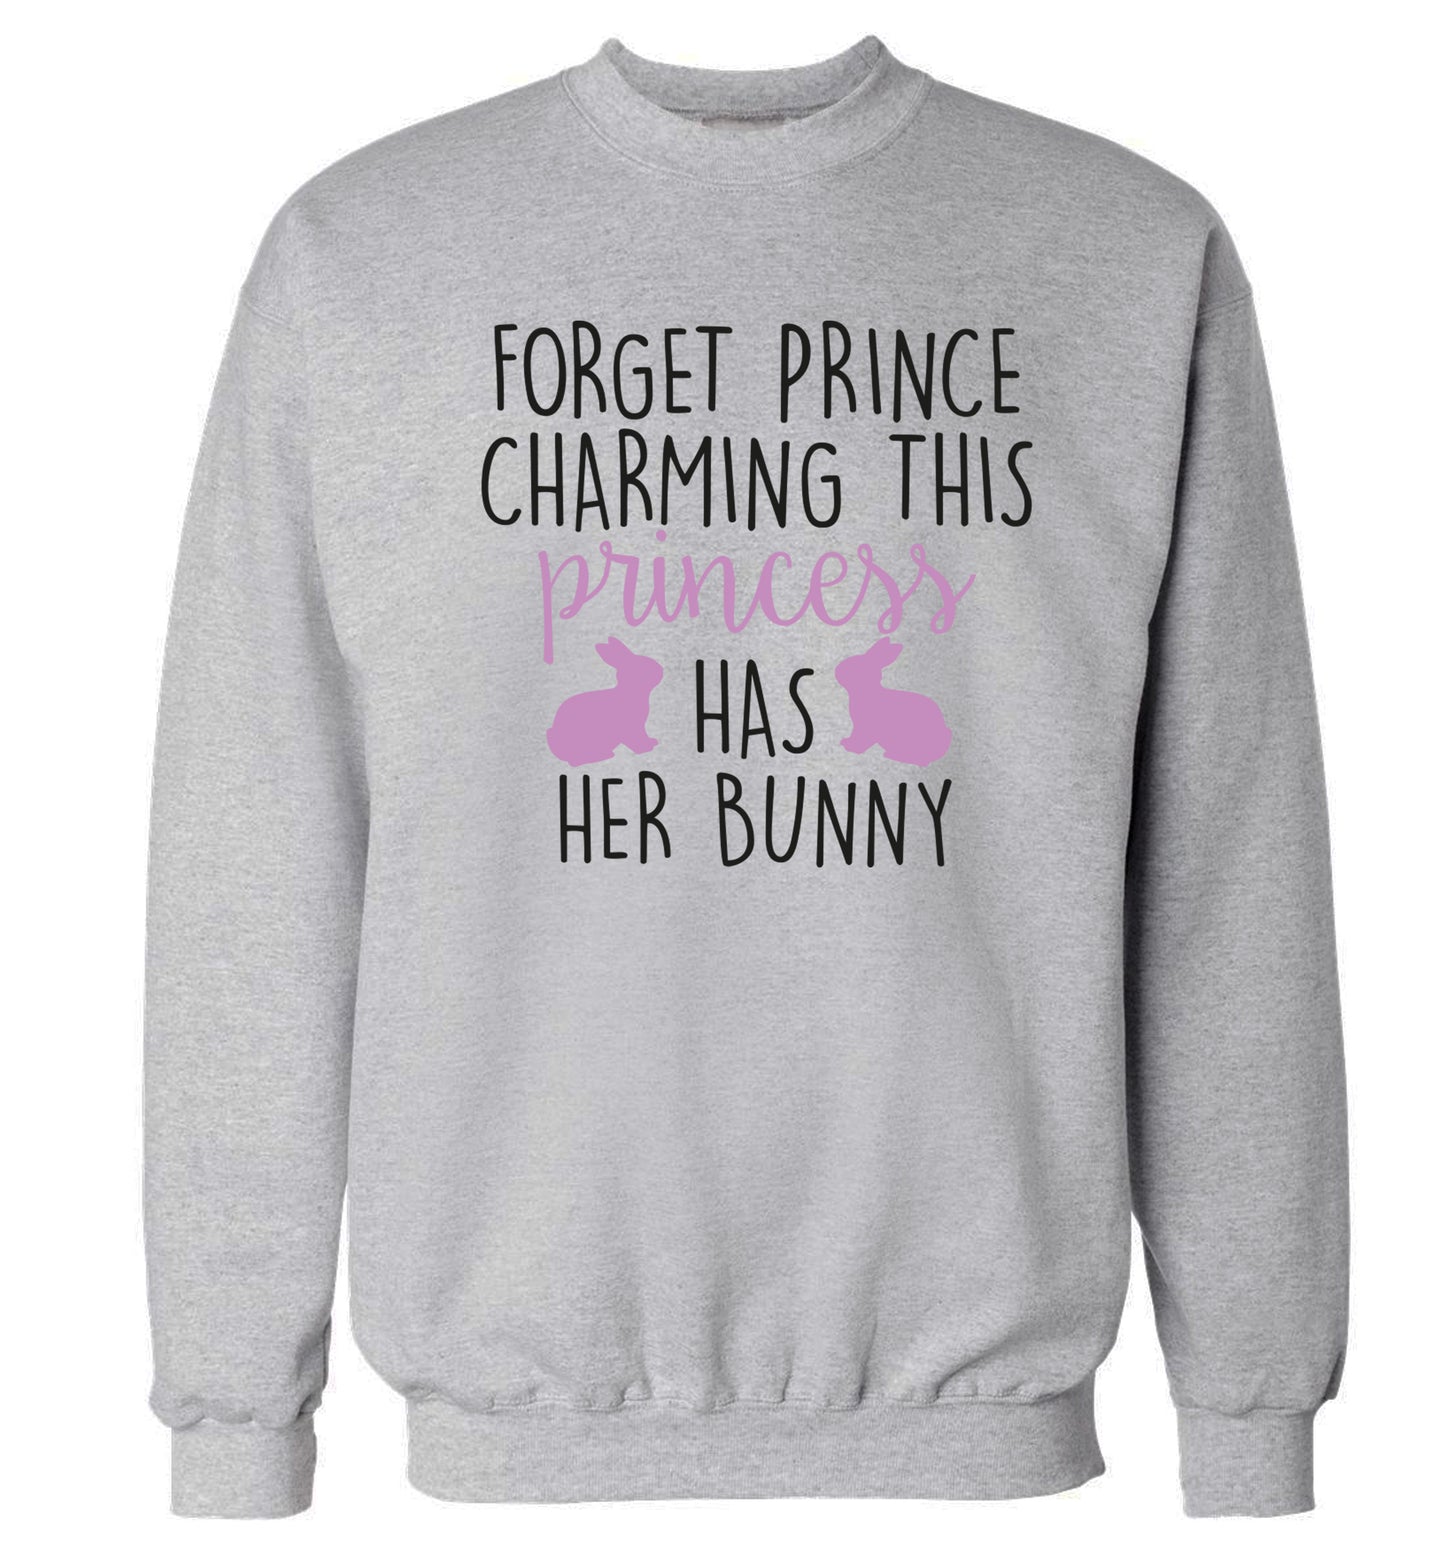 Forget prince charming this princess has her bunny Adult's unisex grey  sweater 2XL